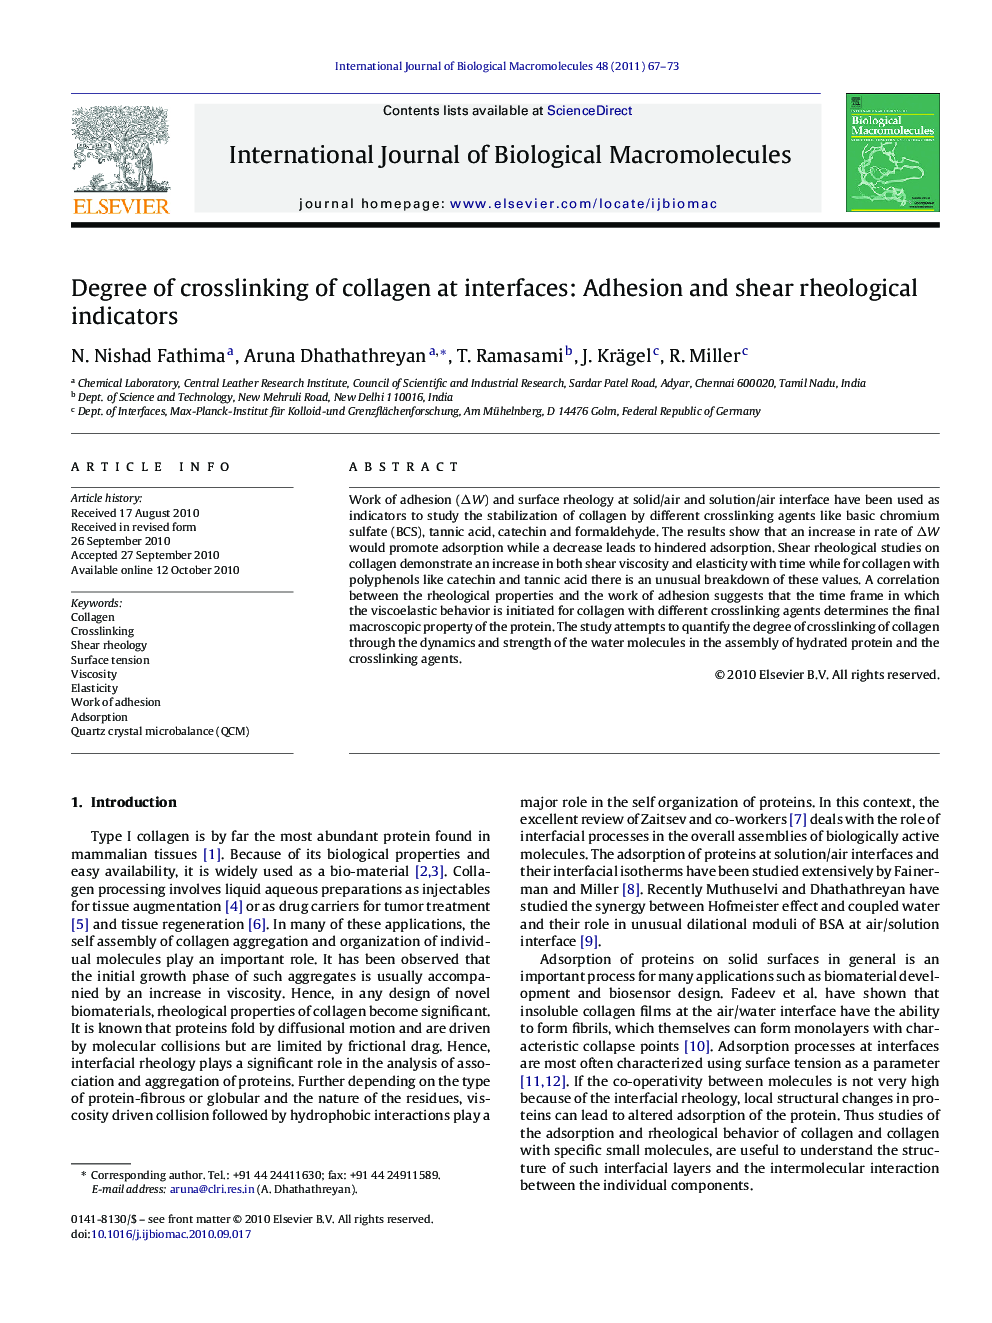 Degree of crosslinking of collagen at interfaces: Adhesion and shear rheological indicators